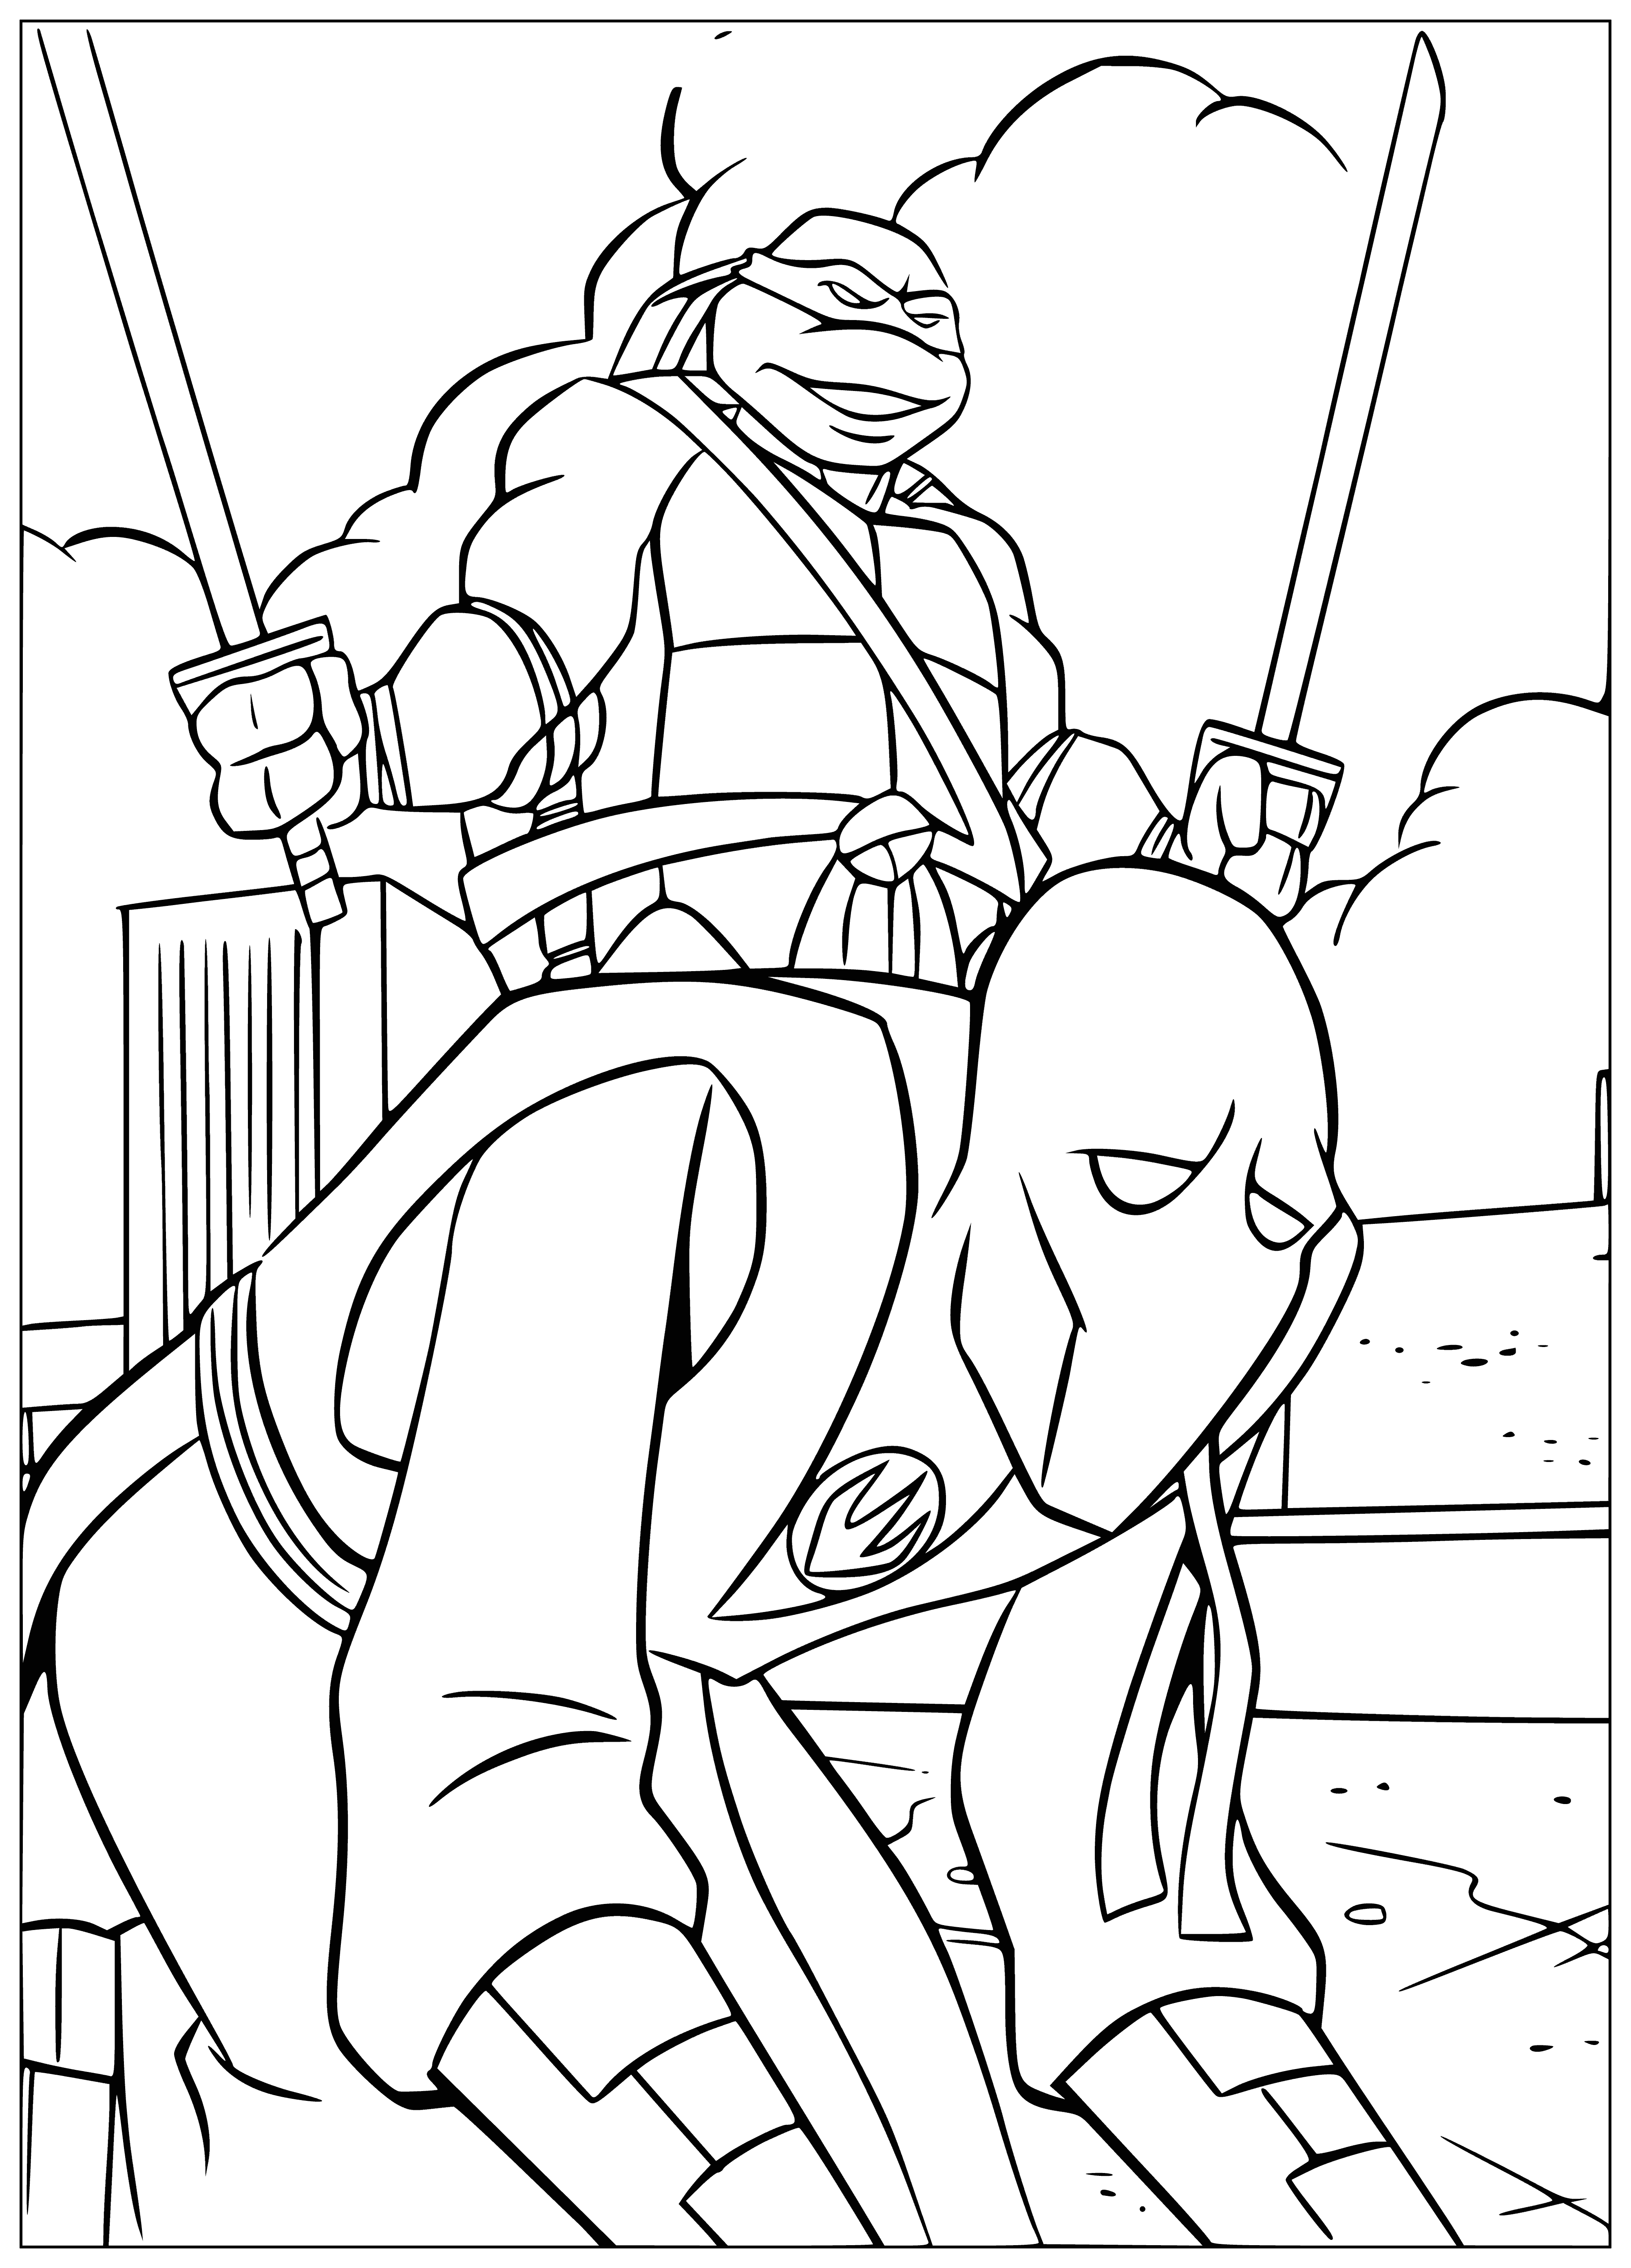 coloring page: Turtle with light green body, dark green shell, brown eyes, yellow stripe and swords in its hands.